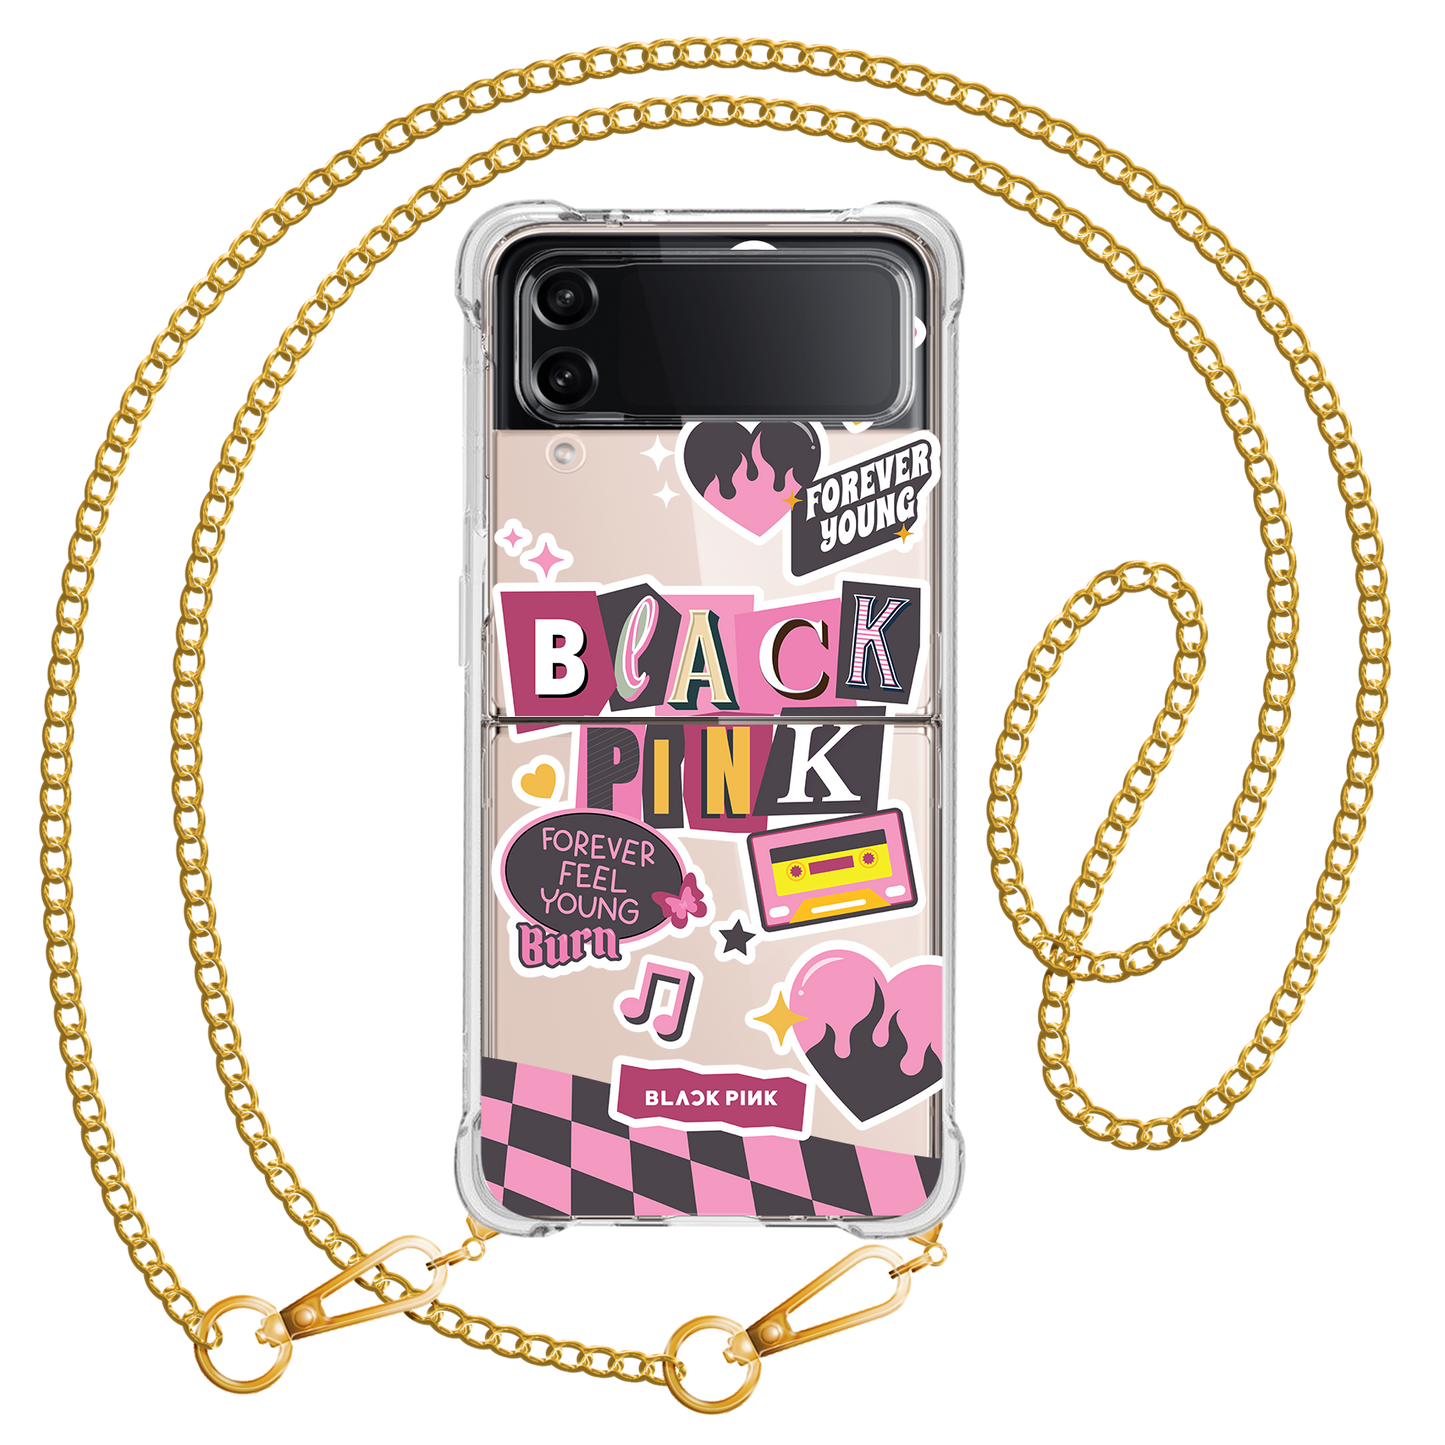 Android Flip / Fold Case - Blackpink Forever Young